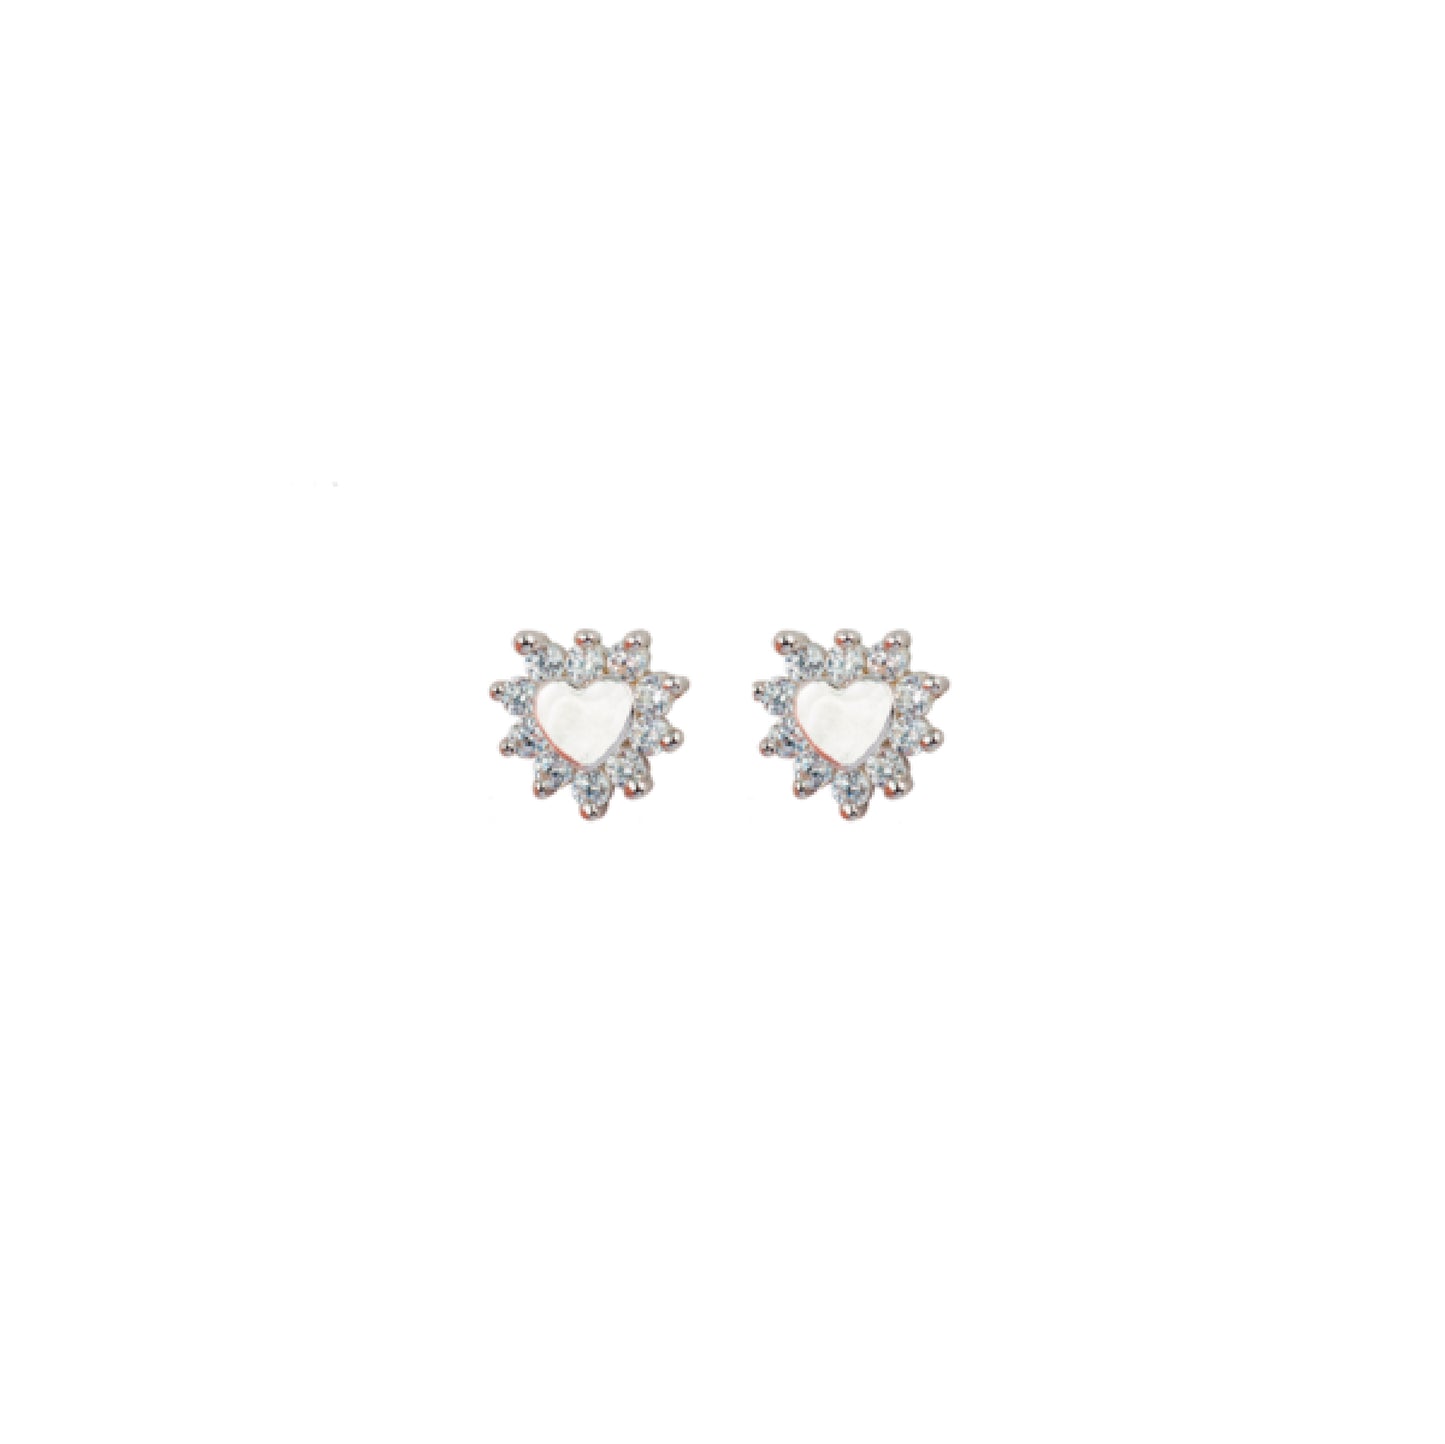 Mini Heart Shaped Earrings with White Cubic Zirconias